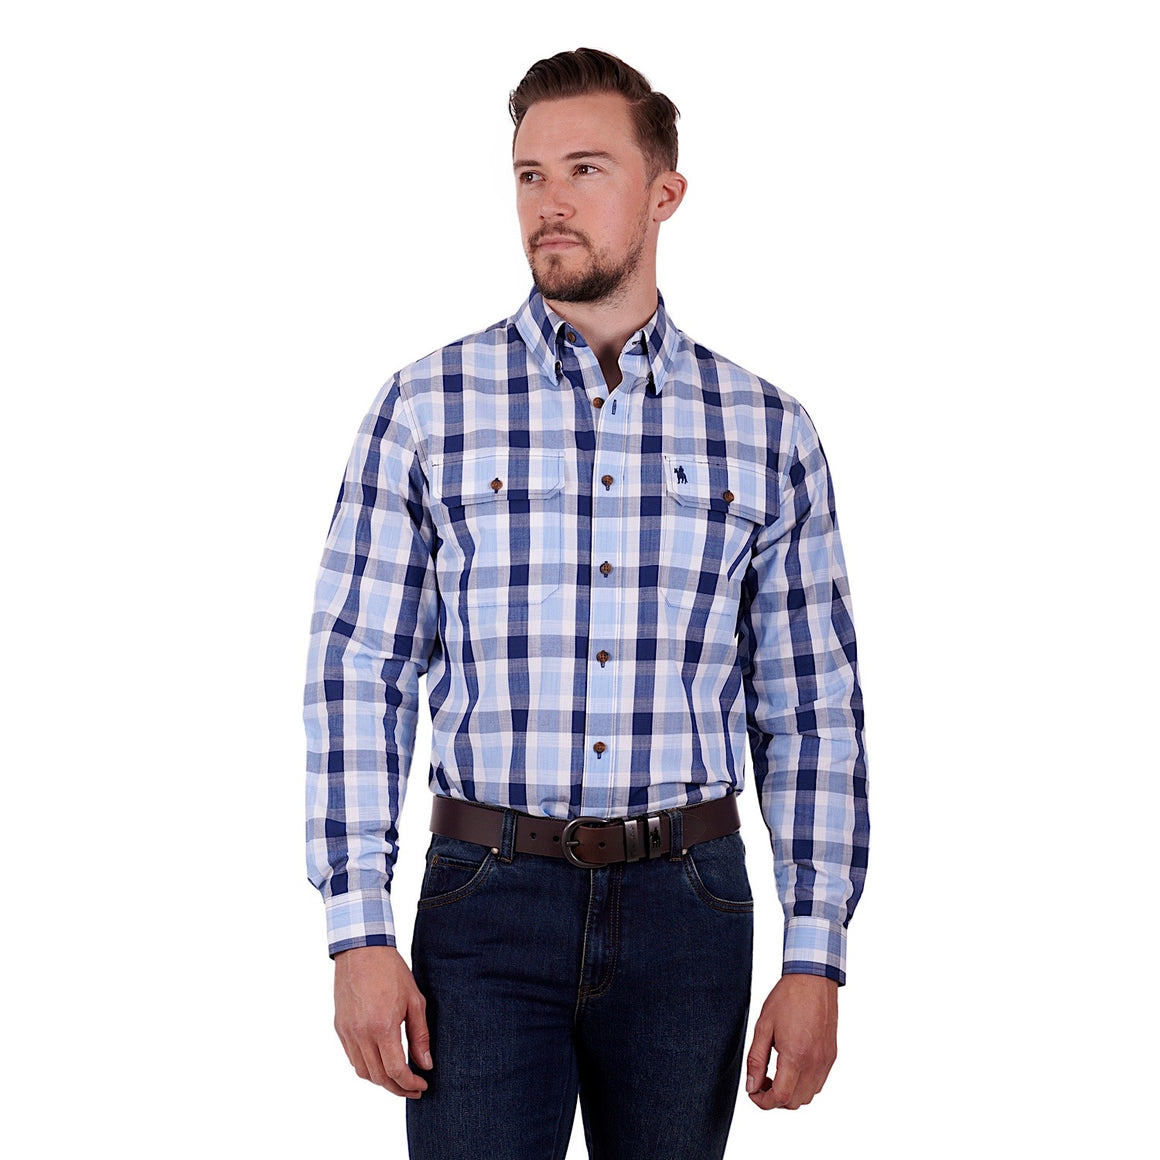 Buy Thomas Cook Mens Shirts - Australia-Wide Delivery - The Stable Door